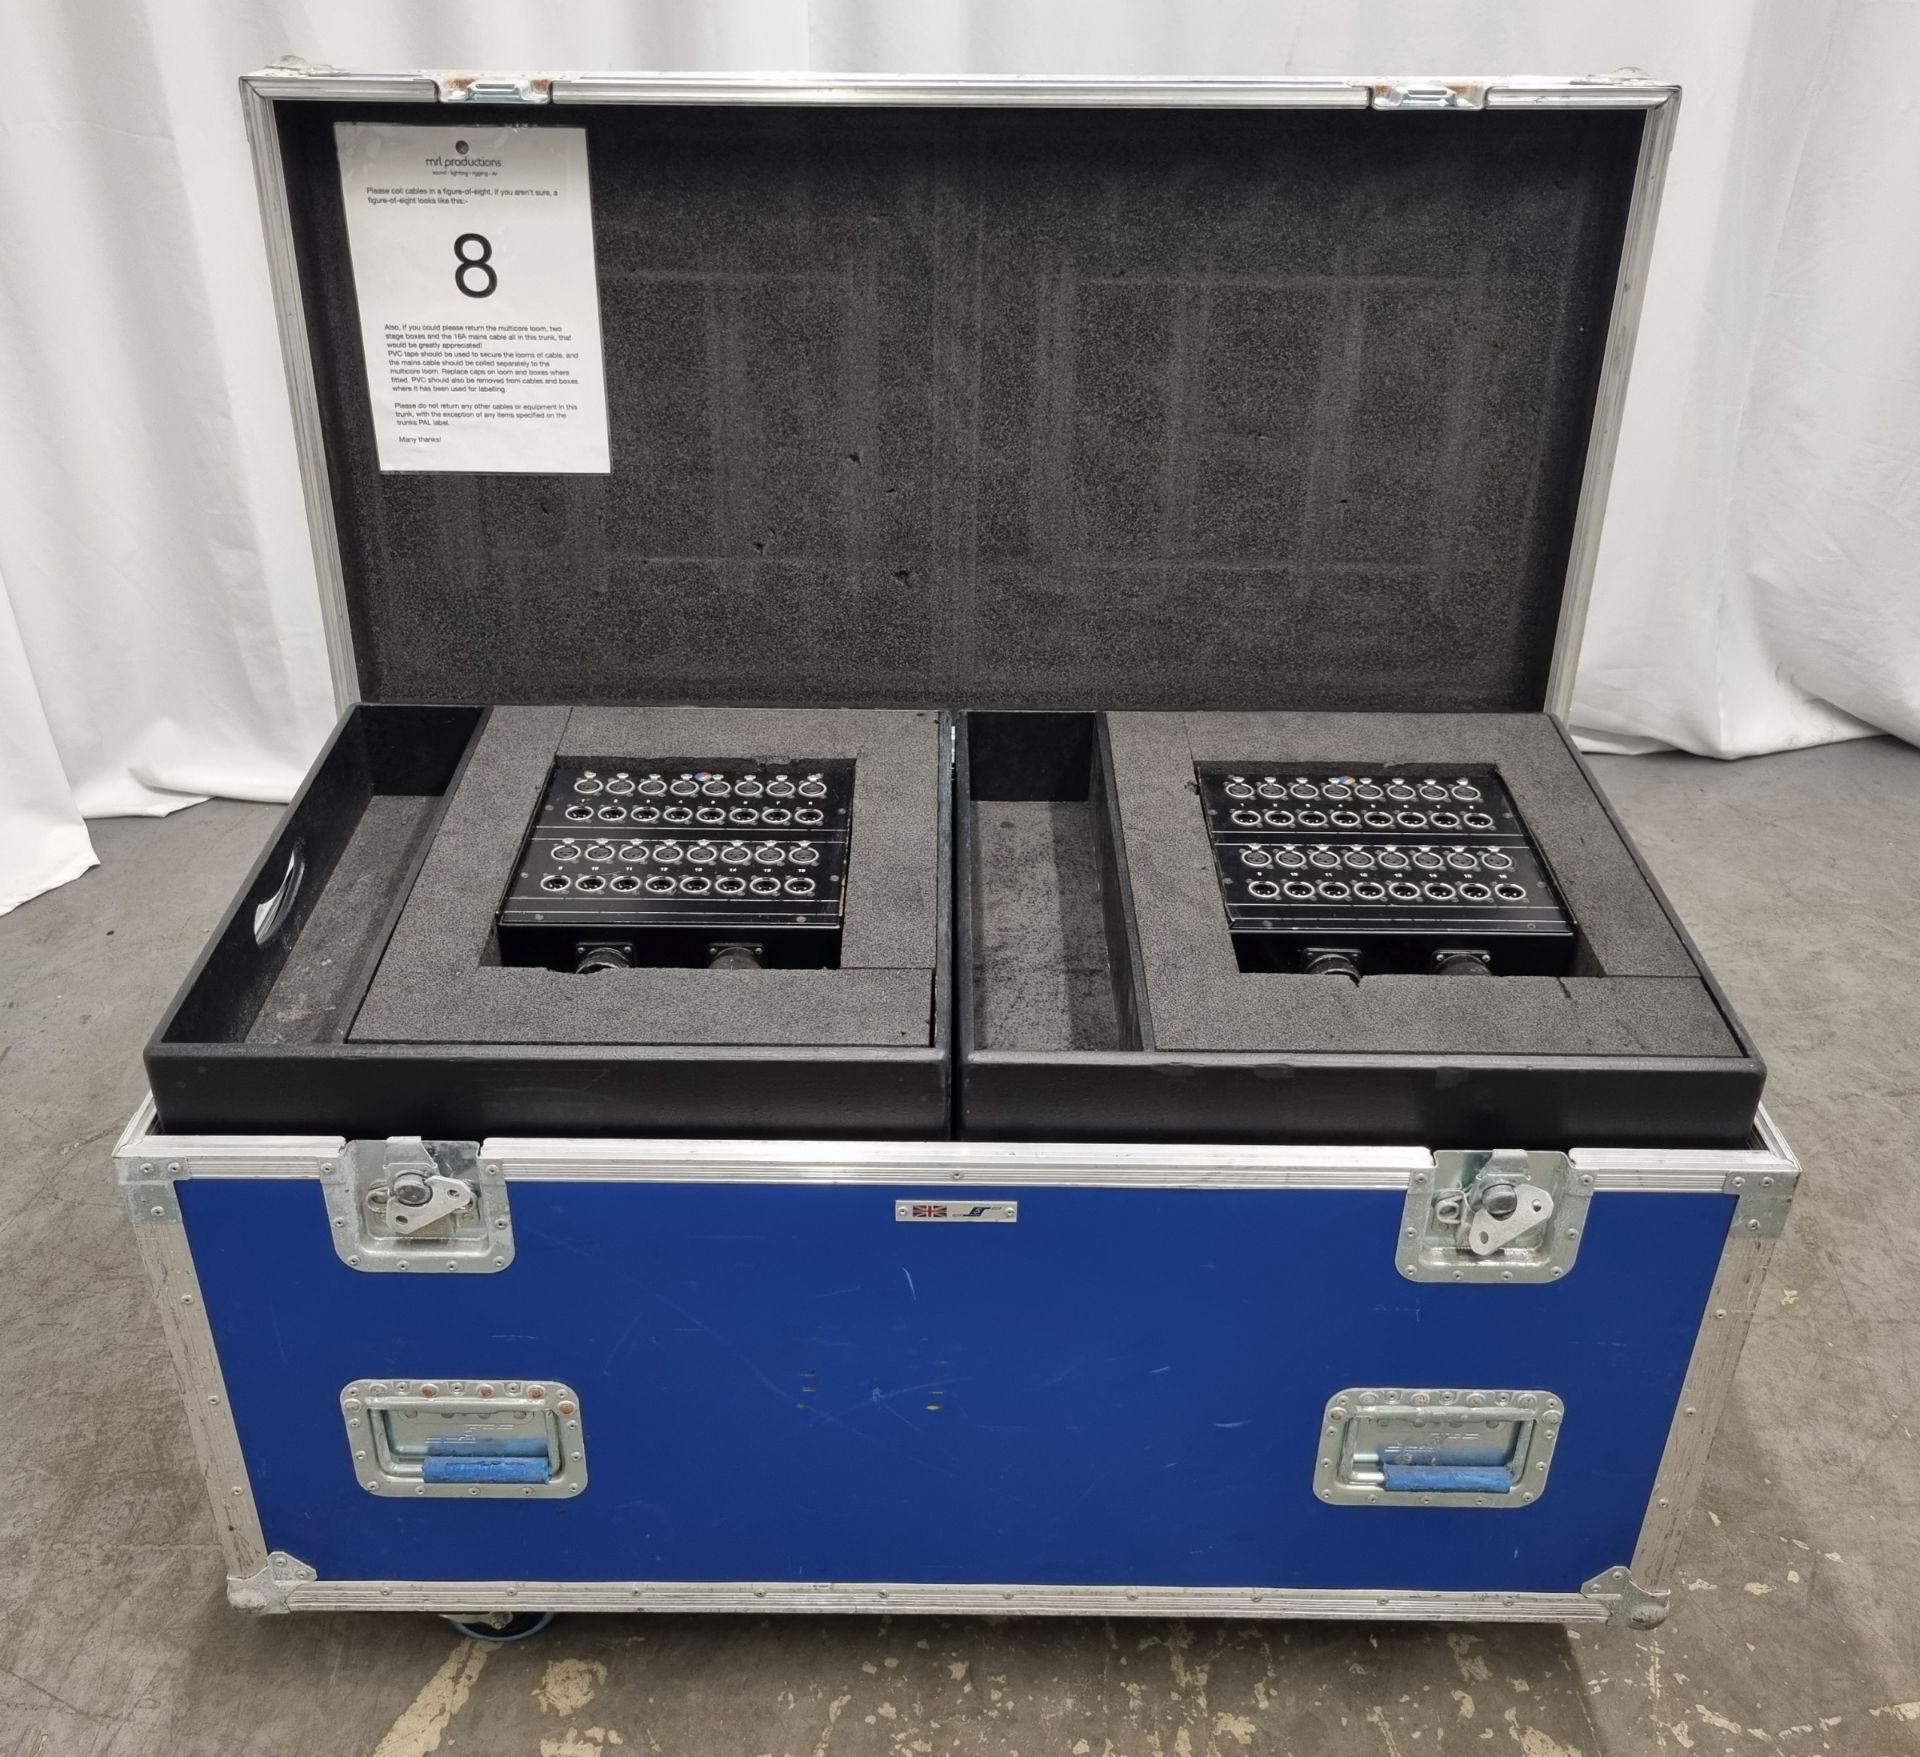 2x 16 input and output XLR stageboxes with multicore loom and mains cable in flight case on wheels